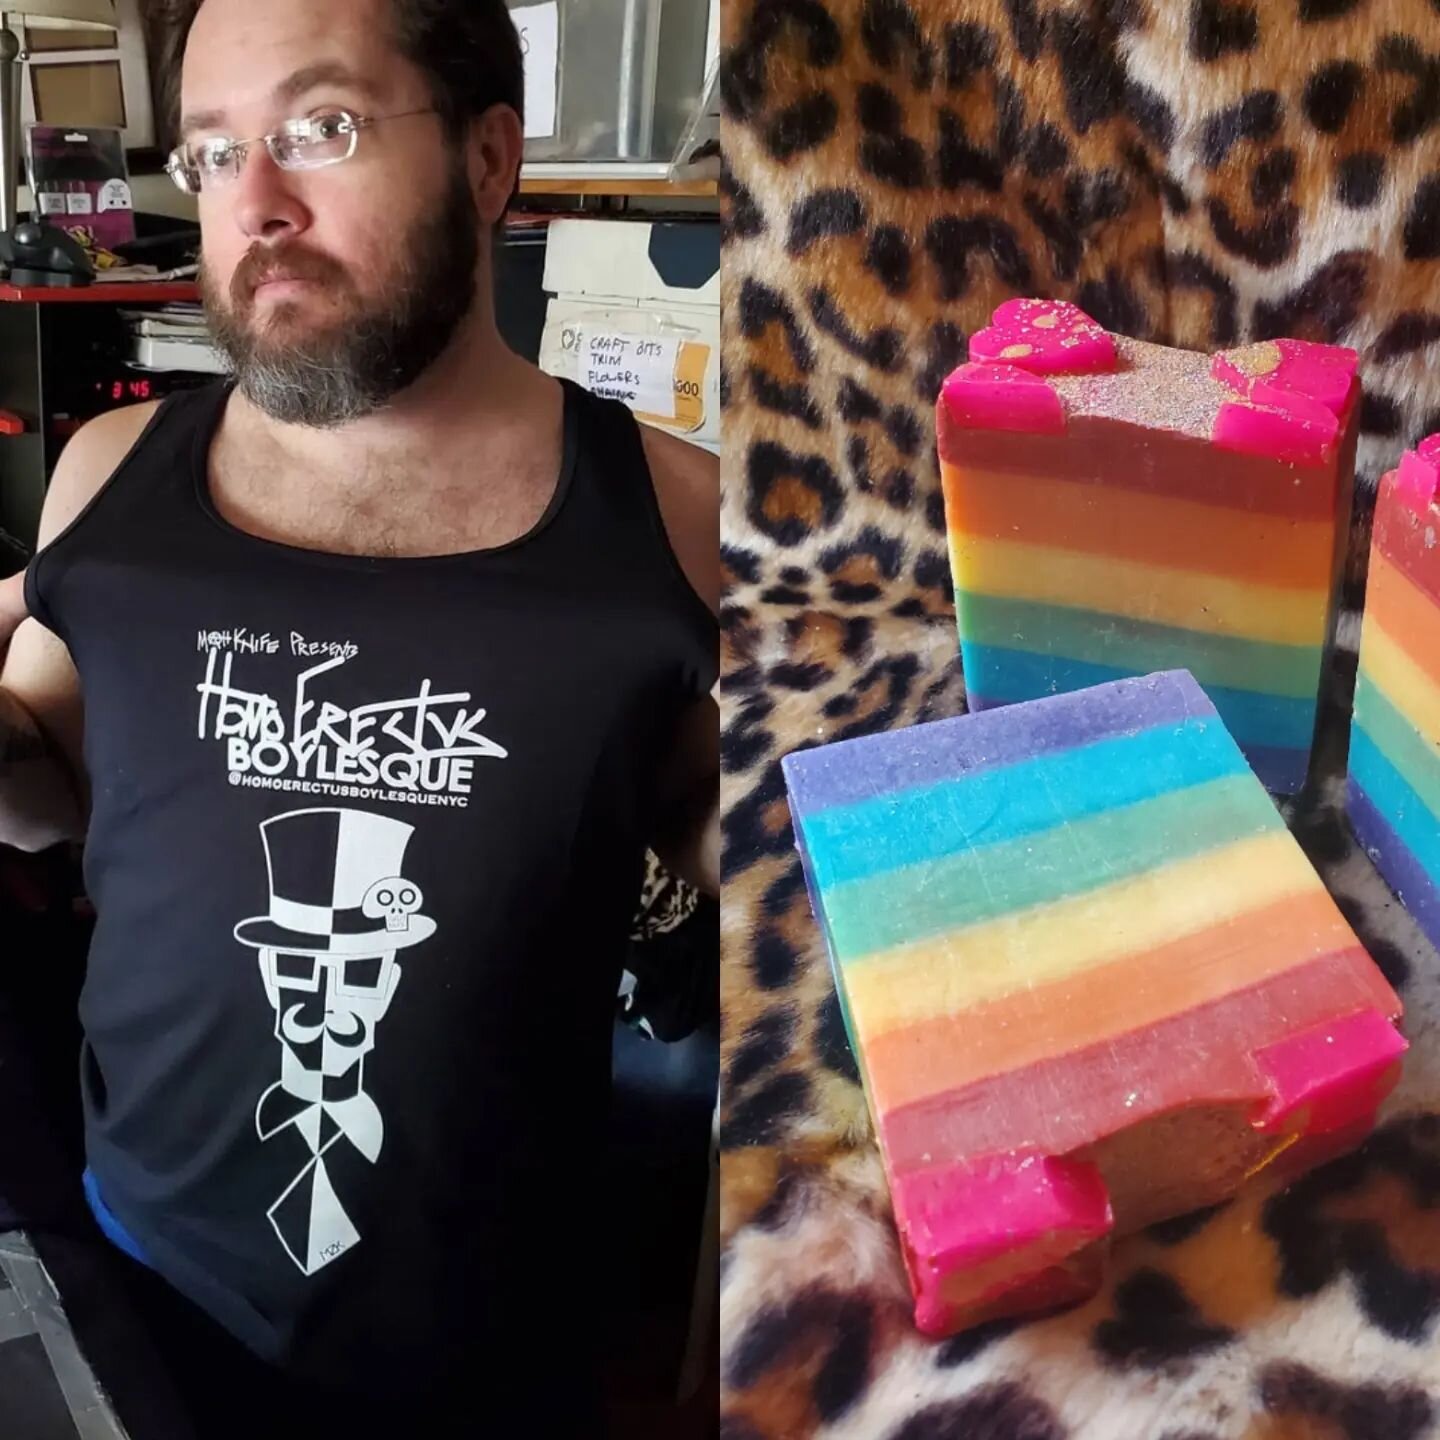 You will have a chance to buy limited addition @homoerectusboylesquenyc tank tops and handmade @baronvonsoap at the show TOMORROW.  LINK IN THE BIO. 
#homoerectusboylesquenyc #boylesque #baronofboylesque #baronvonsoap #boylesque #burlesque #burlesque